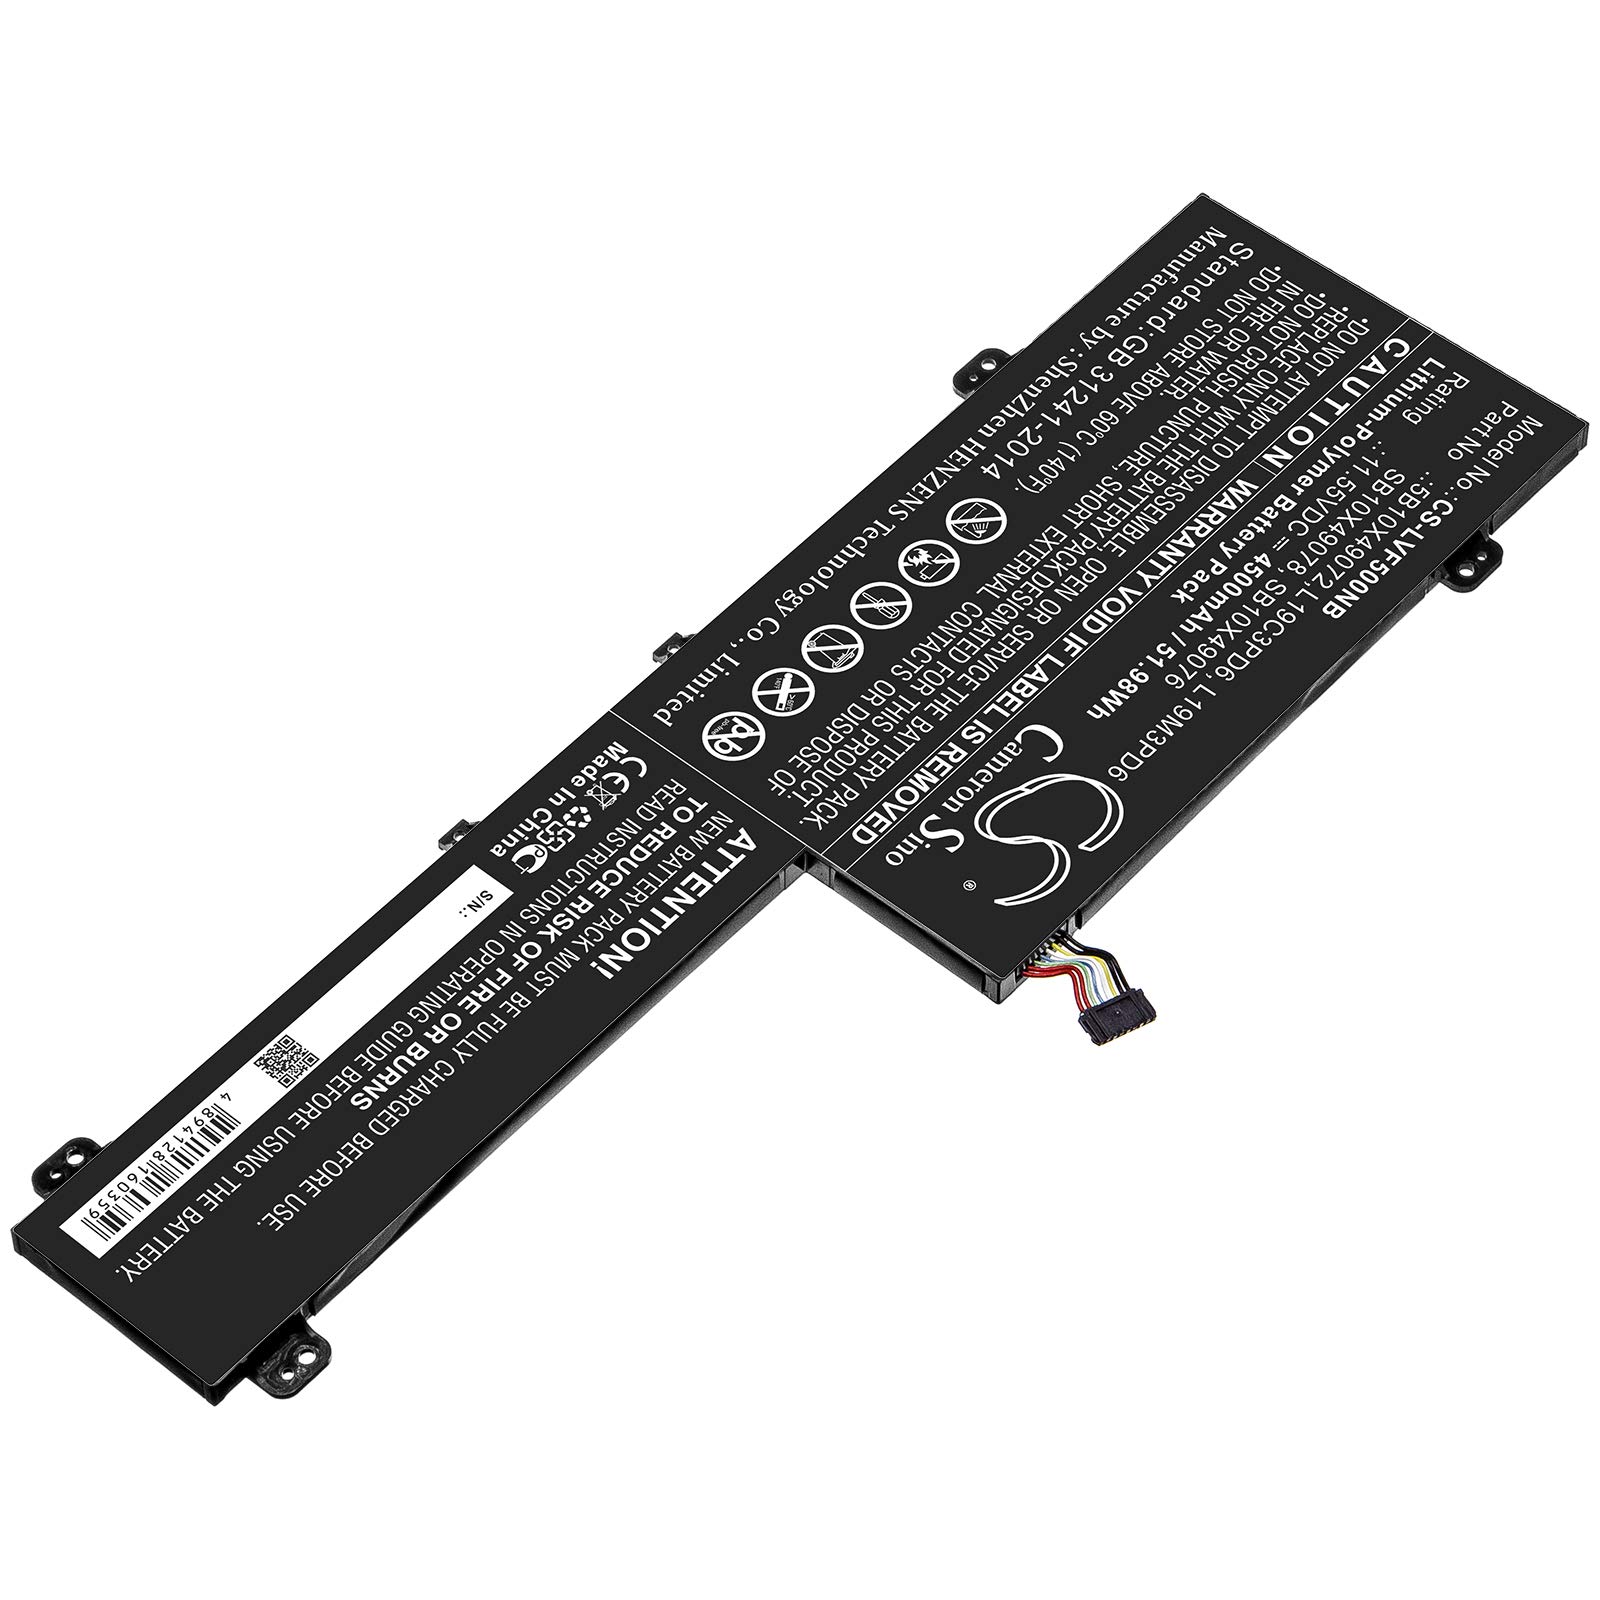 ChoyoqeR Replacement Battery for Flex 5 14 AMD 81X20005US, IP Flex 5, IP Flex 5 15, IP Flex 5 80XA000YUS, IP Fle 11.55V/4500mA